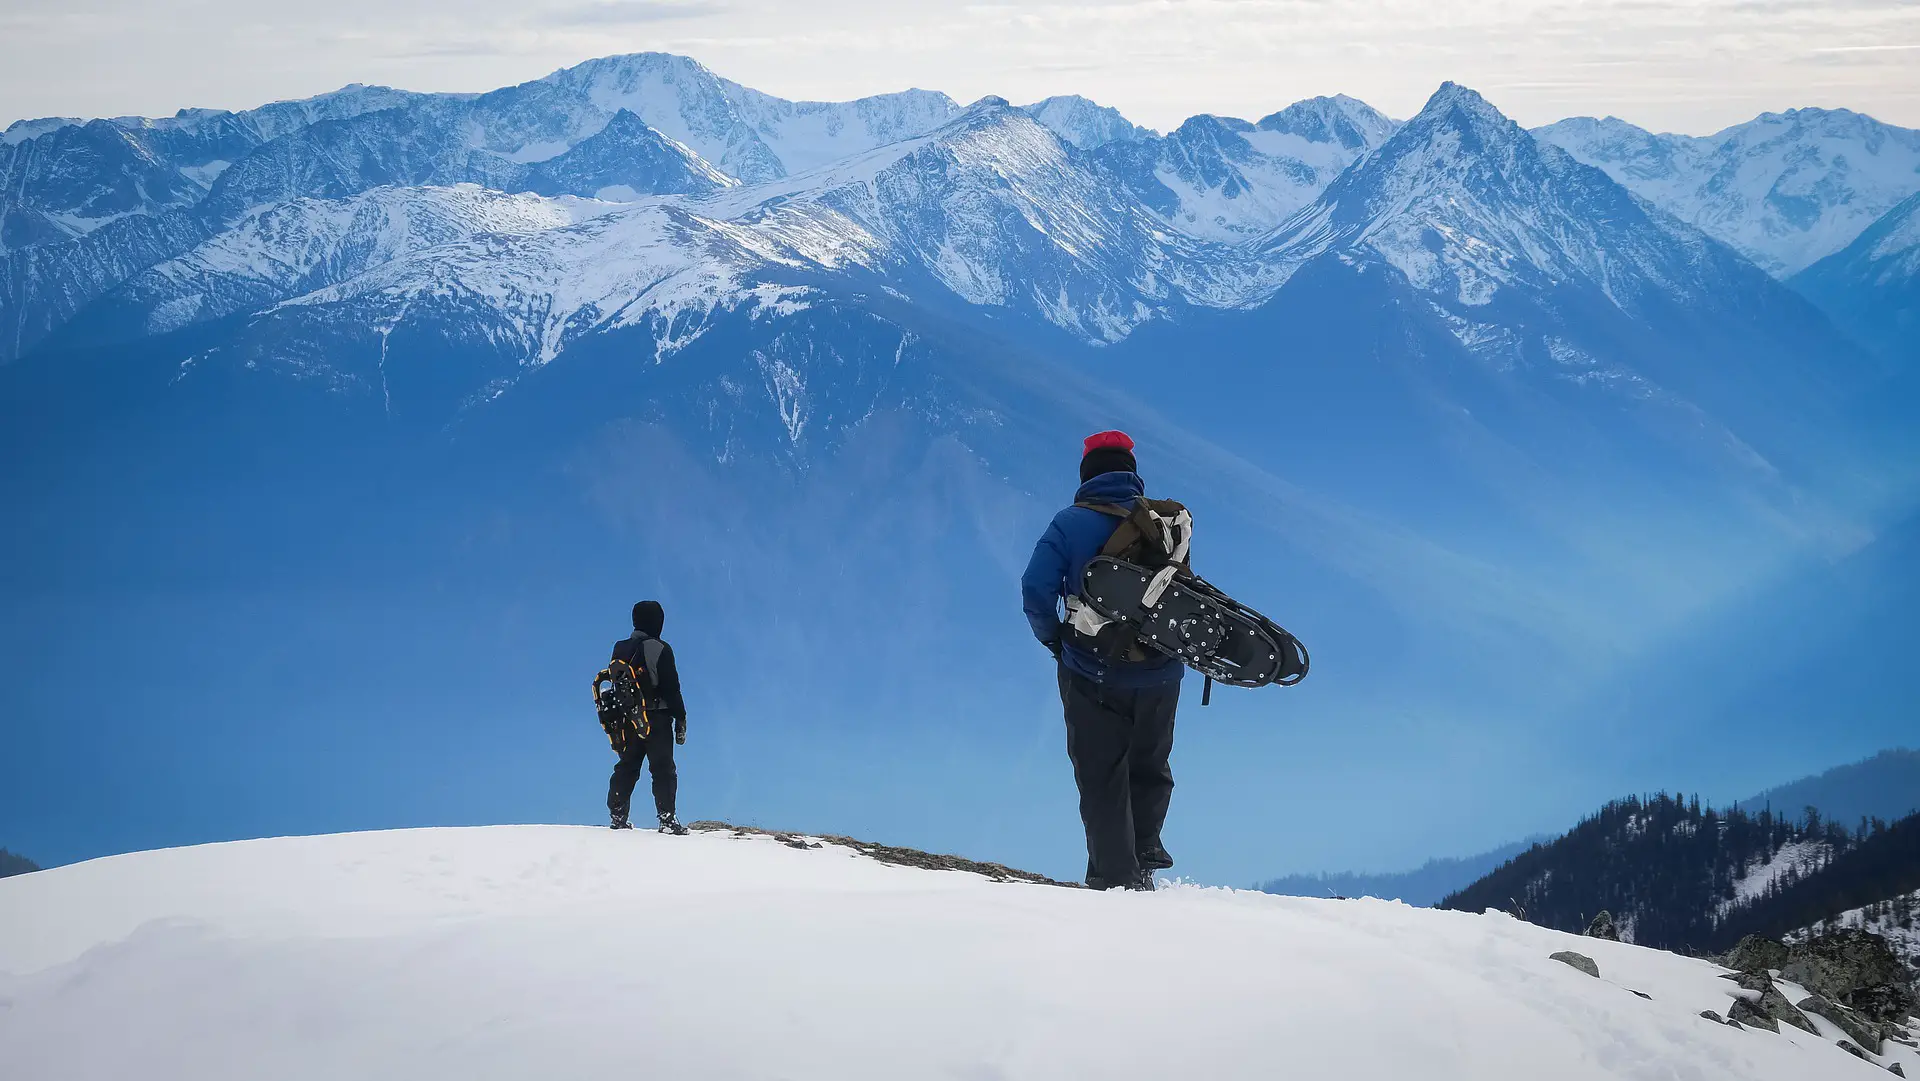 Snowshoeing in the mountains in British Columbia - Photo: Kristin Noack